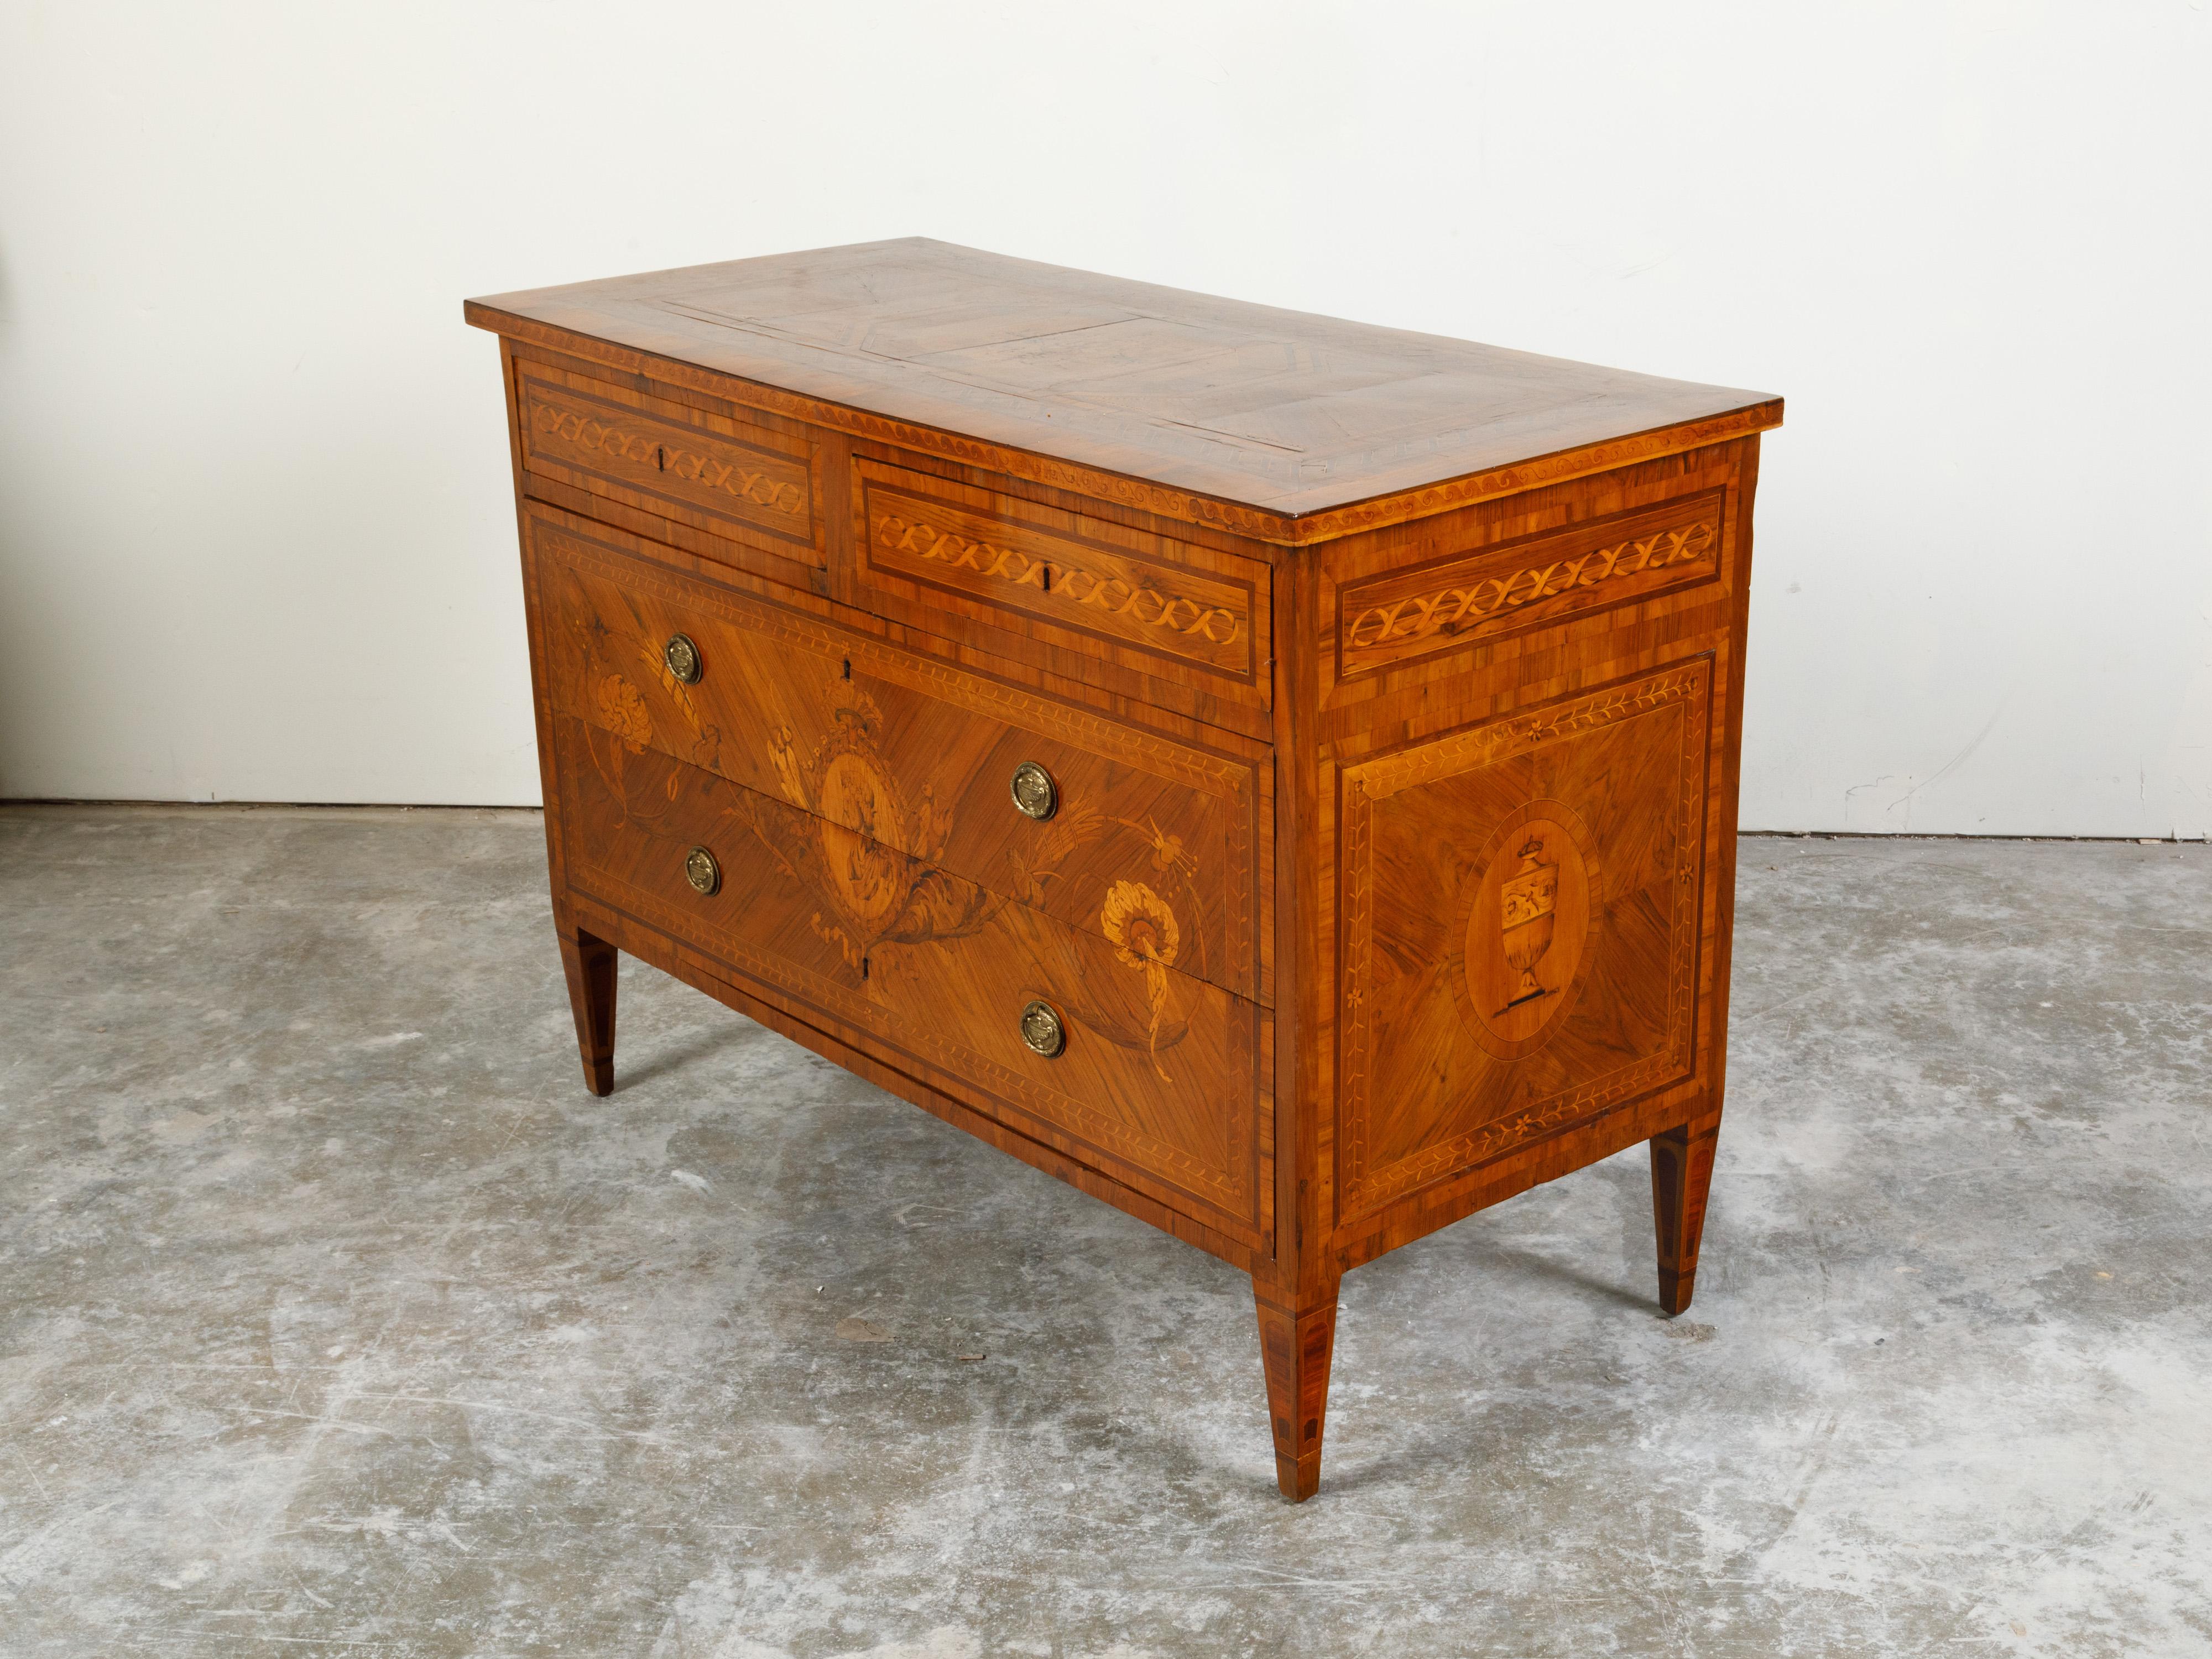 Italian Neoclassical Period 1800s Fruitwood Four-Drawer Commode with Marquetry For Sale 4